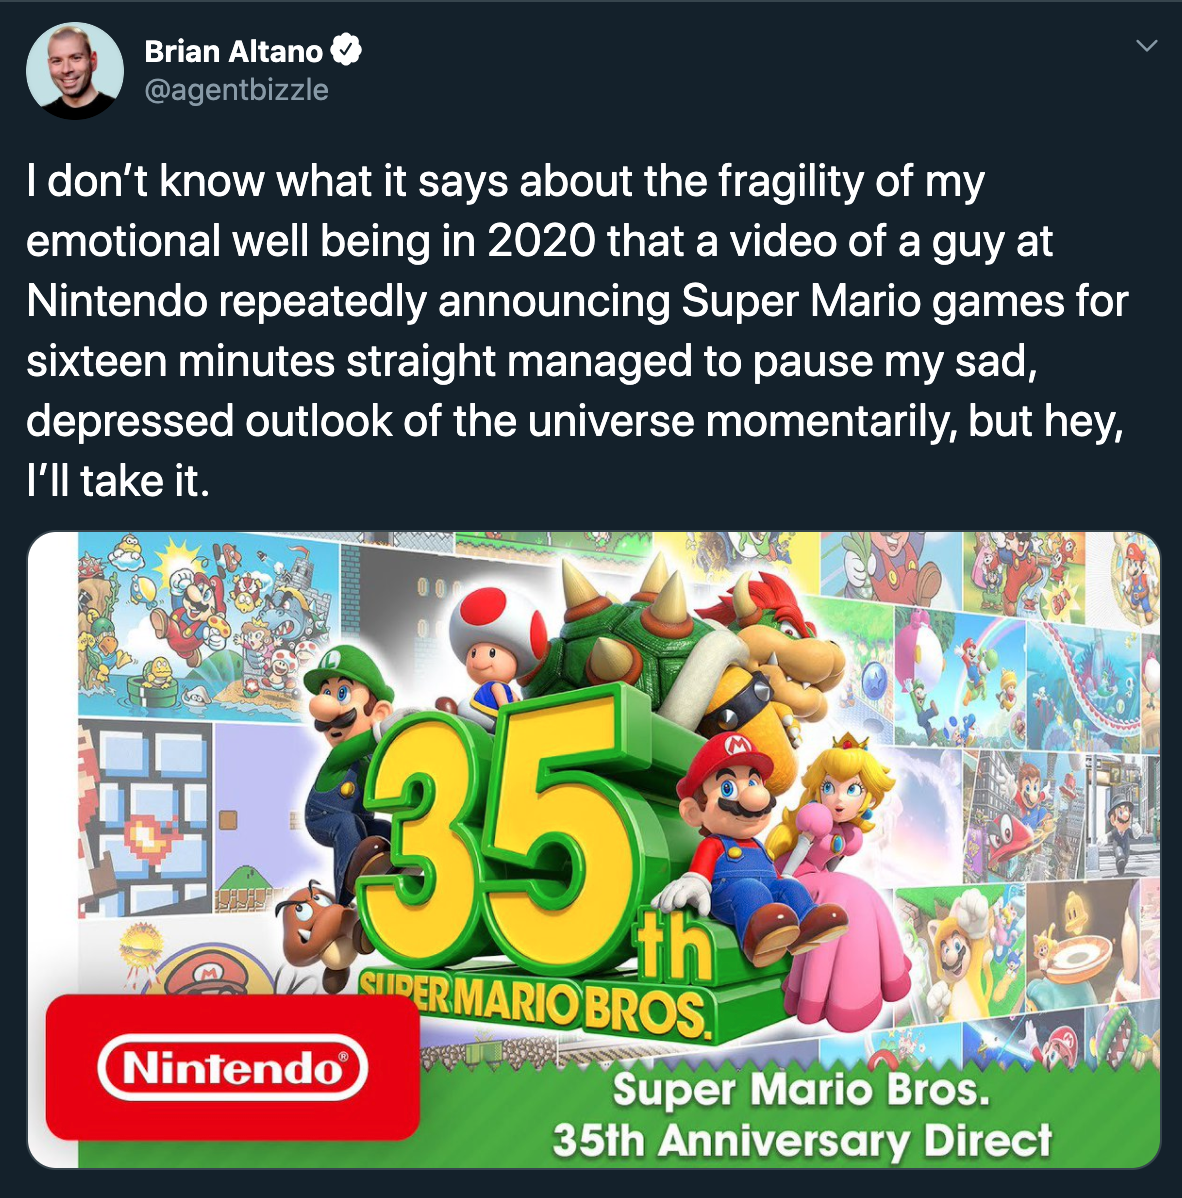 I don't know what it says about the fragility of my emotional well being in 2020 that a video of a guy at Nintendo repeatedly announcing Super Mario games for sixteen minutes straight managed to pause my sad, depressed outlook